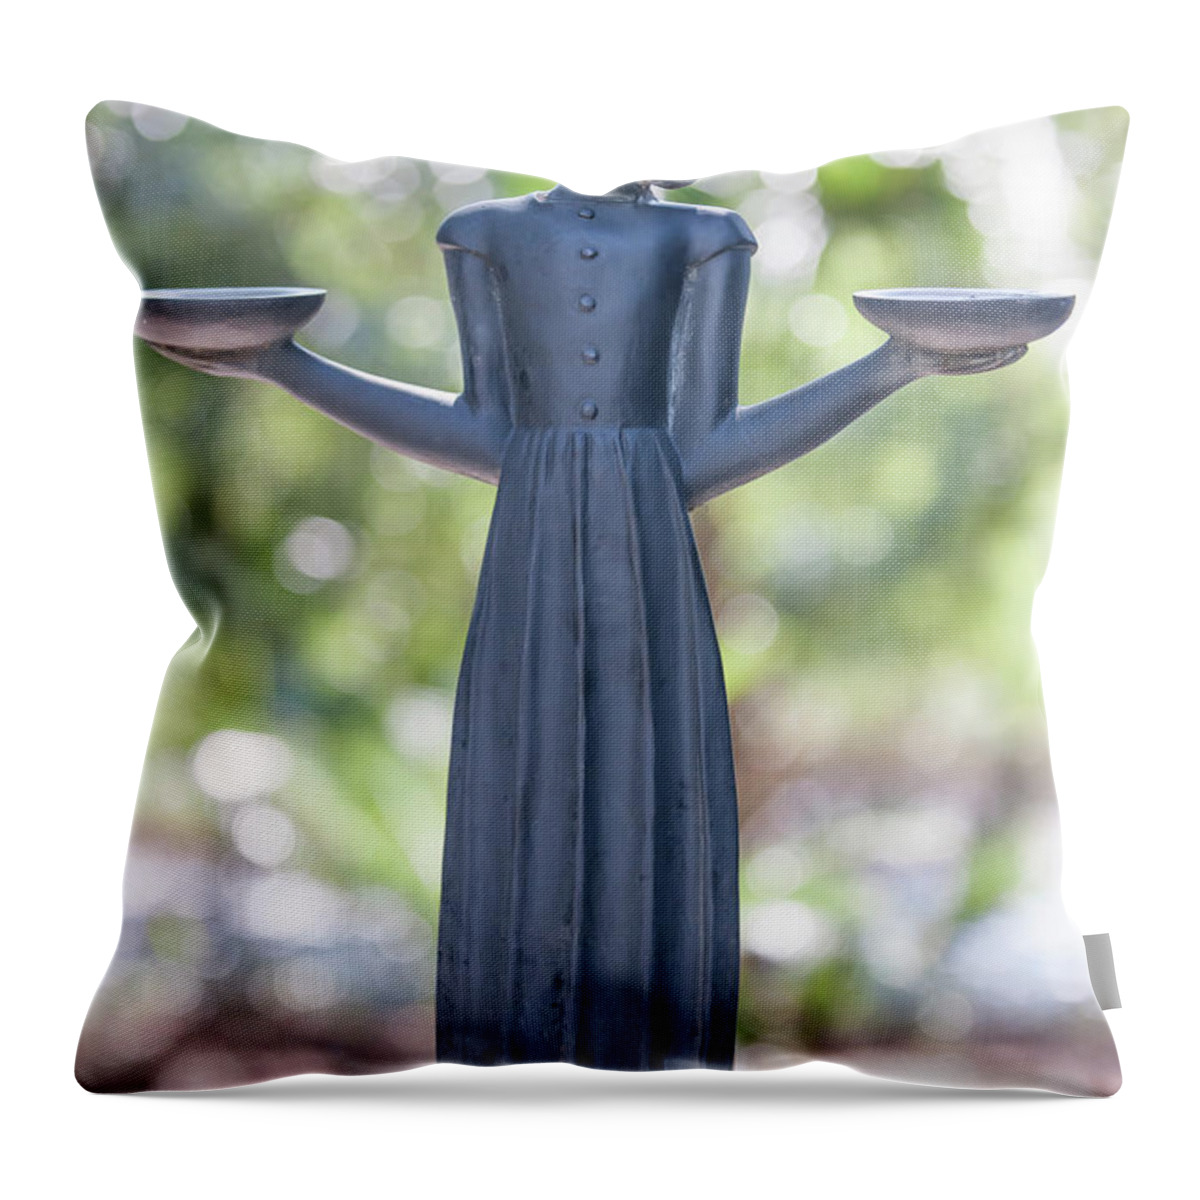 Bird Girl Throw Pillow featuring the photograph Garden Statue Dreams by Dale Powell